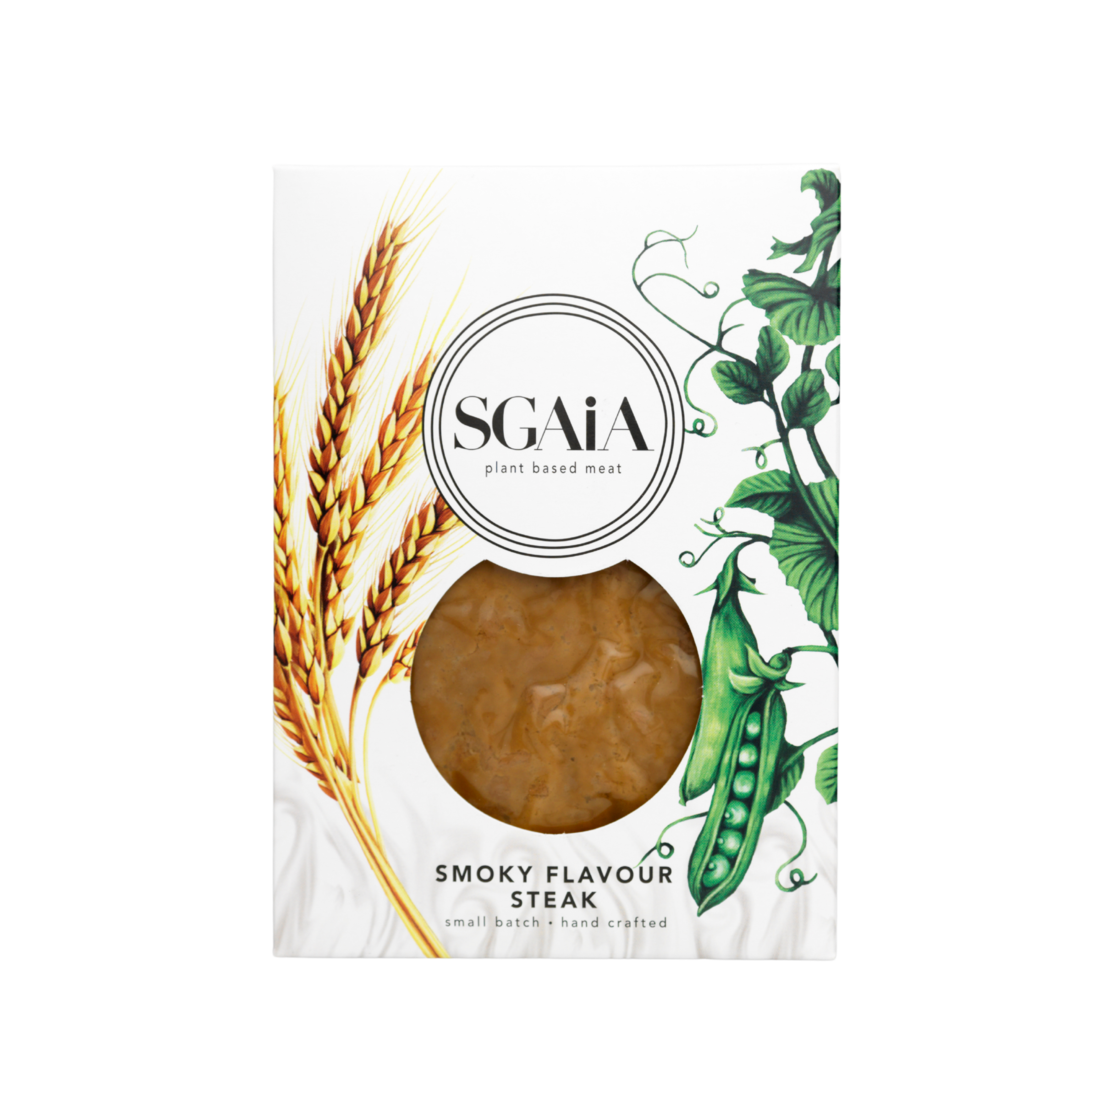 Picture of Sgaia Mheat Steak Smoky Flavour 150g